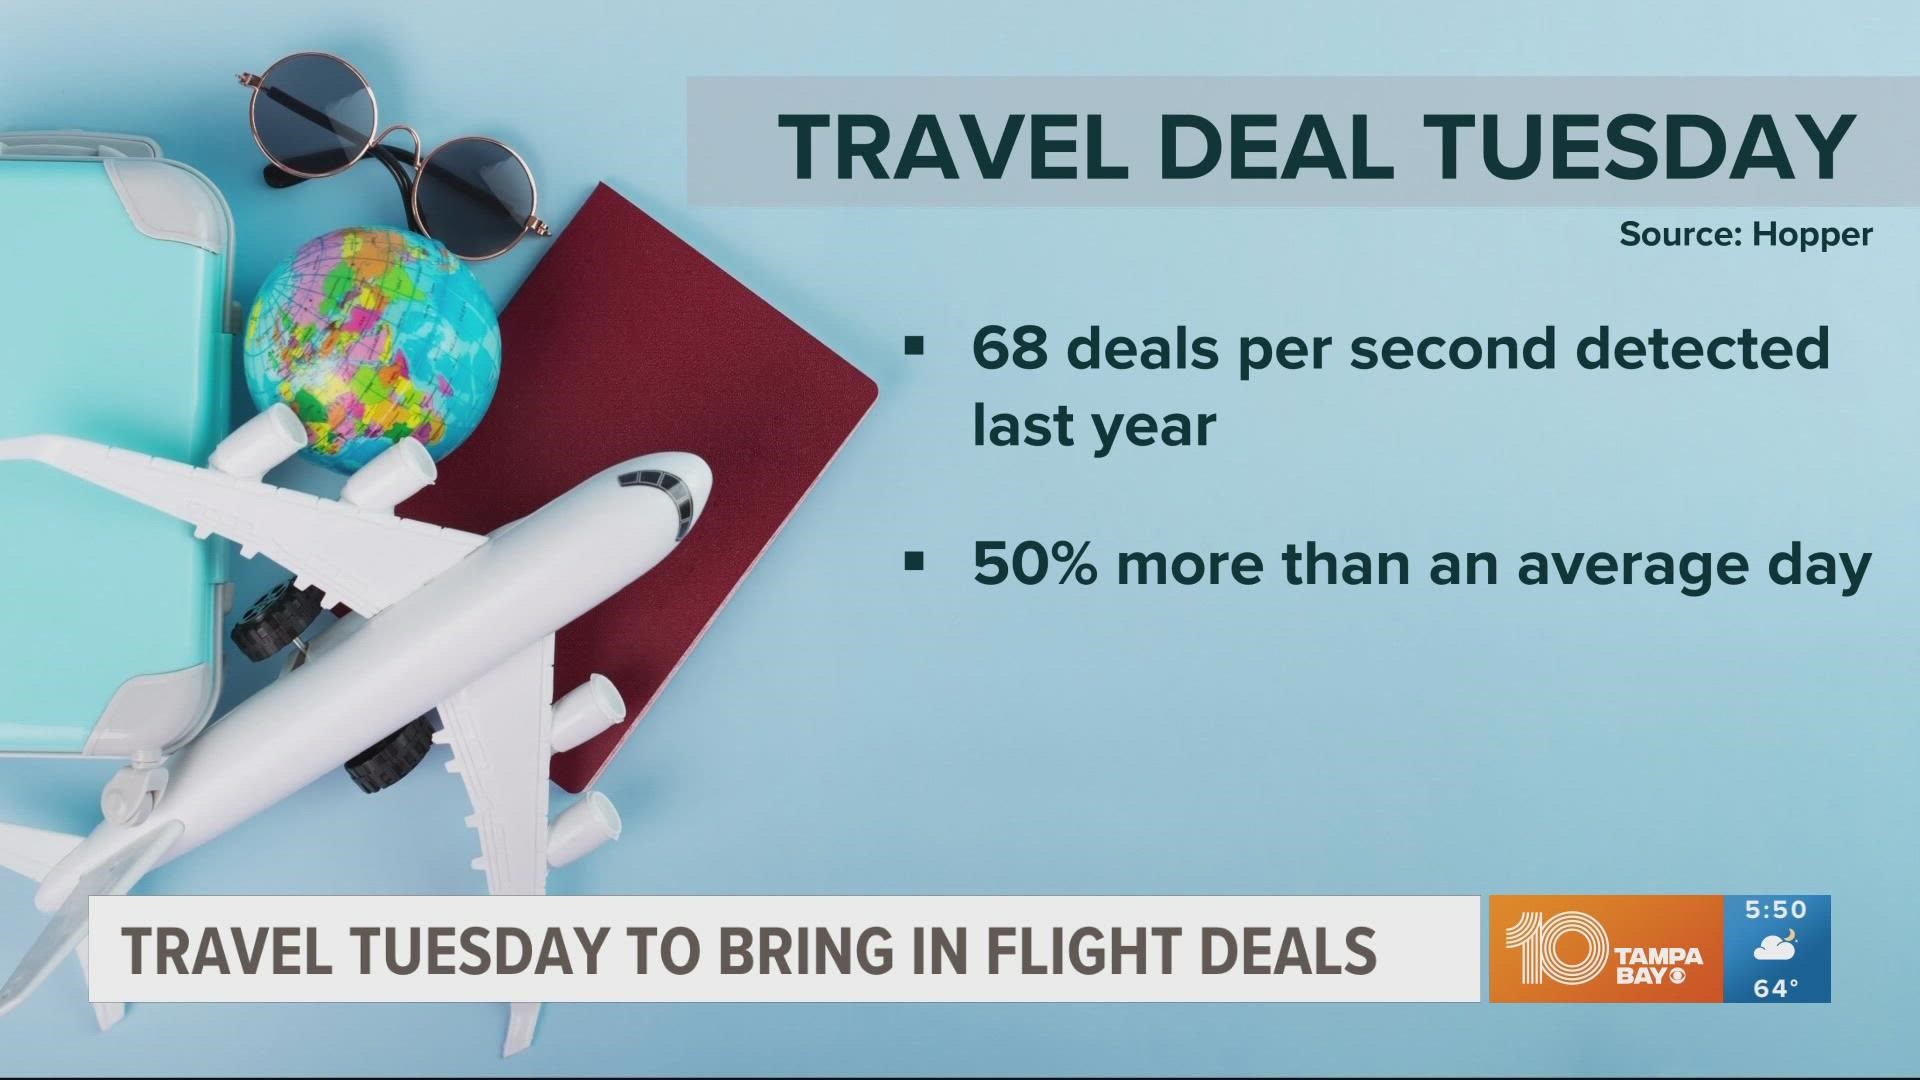 Travel experts have found some of the best deals for flights and hotels come the Tuesday after Thanksgiving. How you can take advantage of those deals.